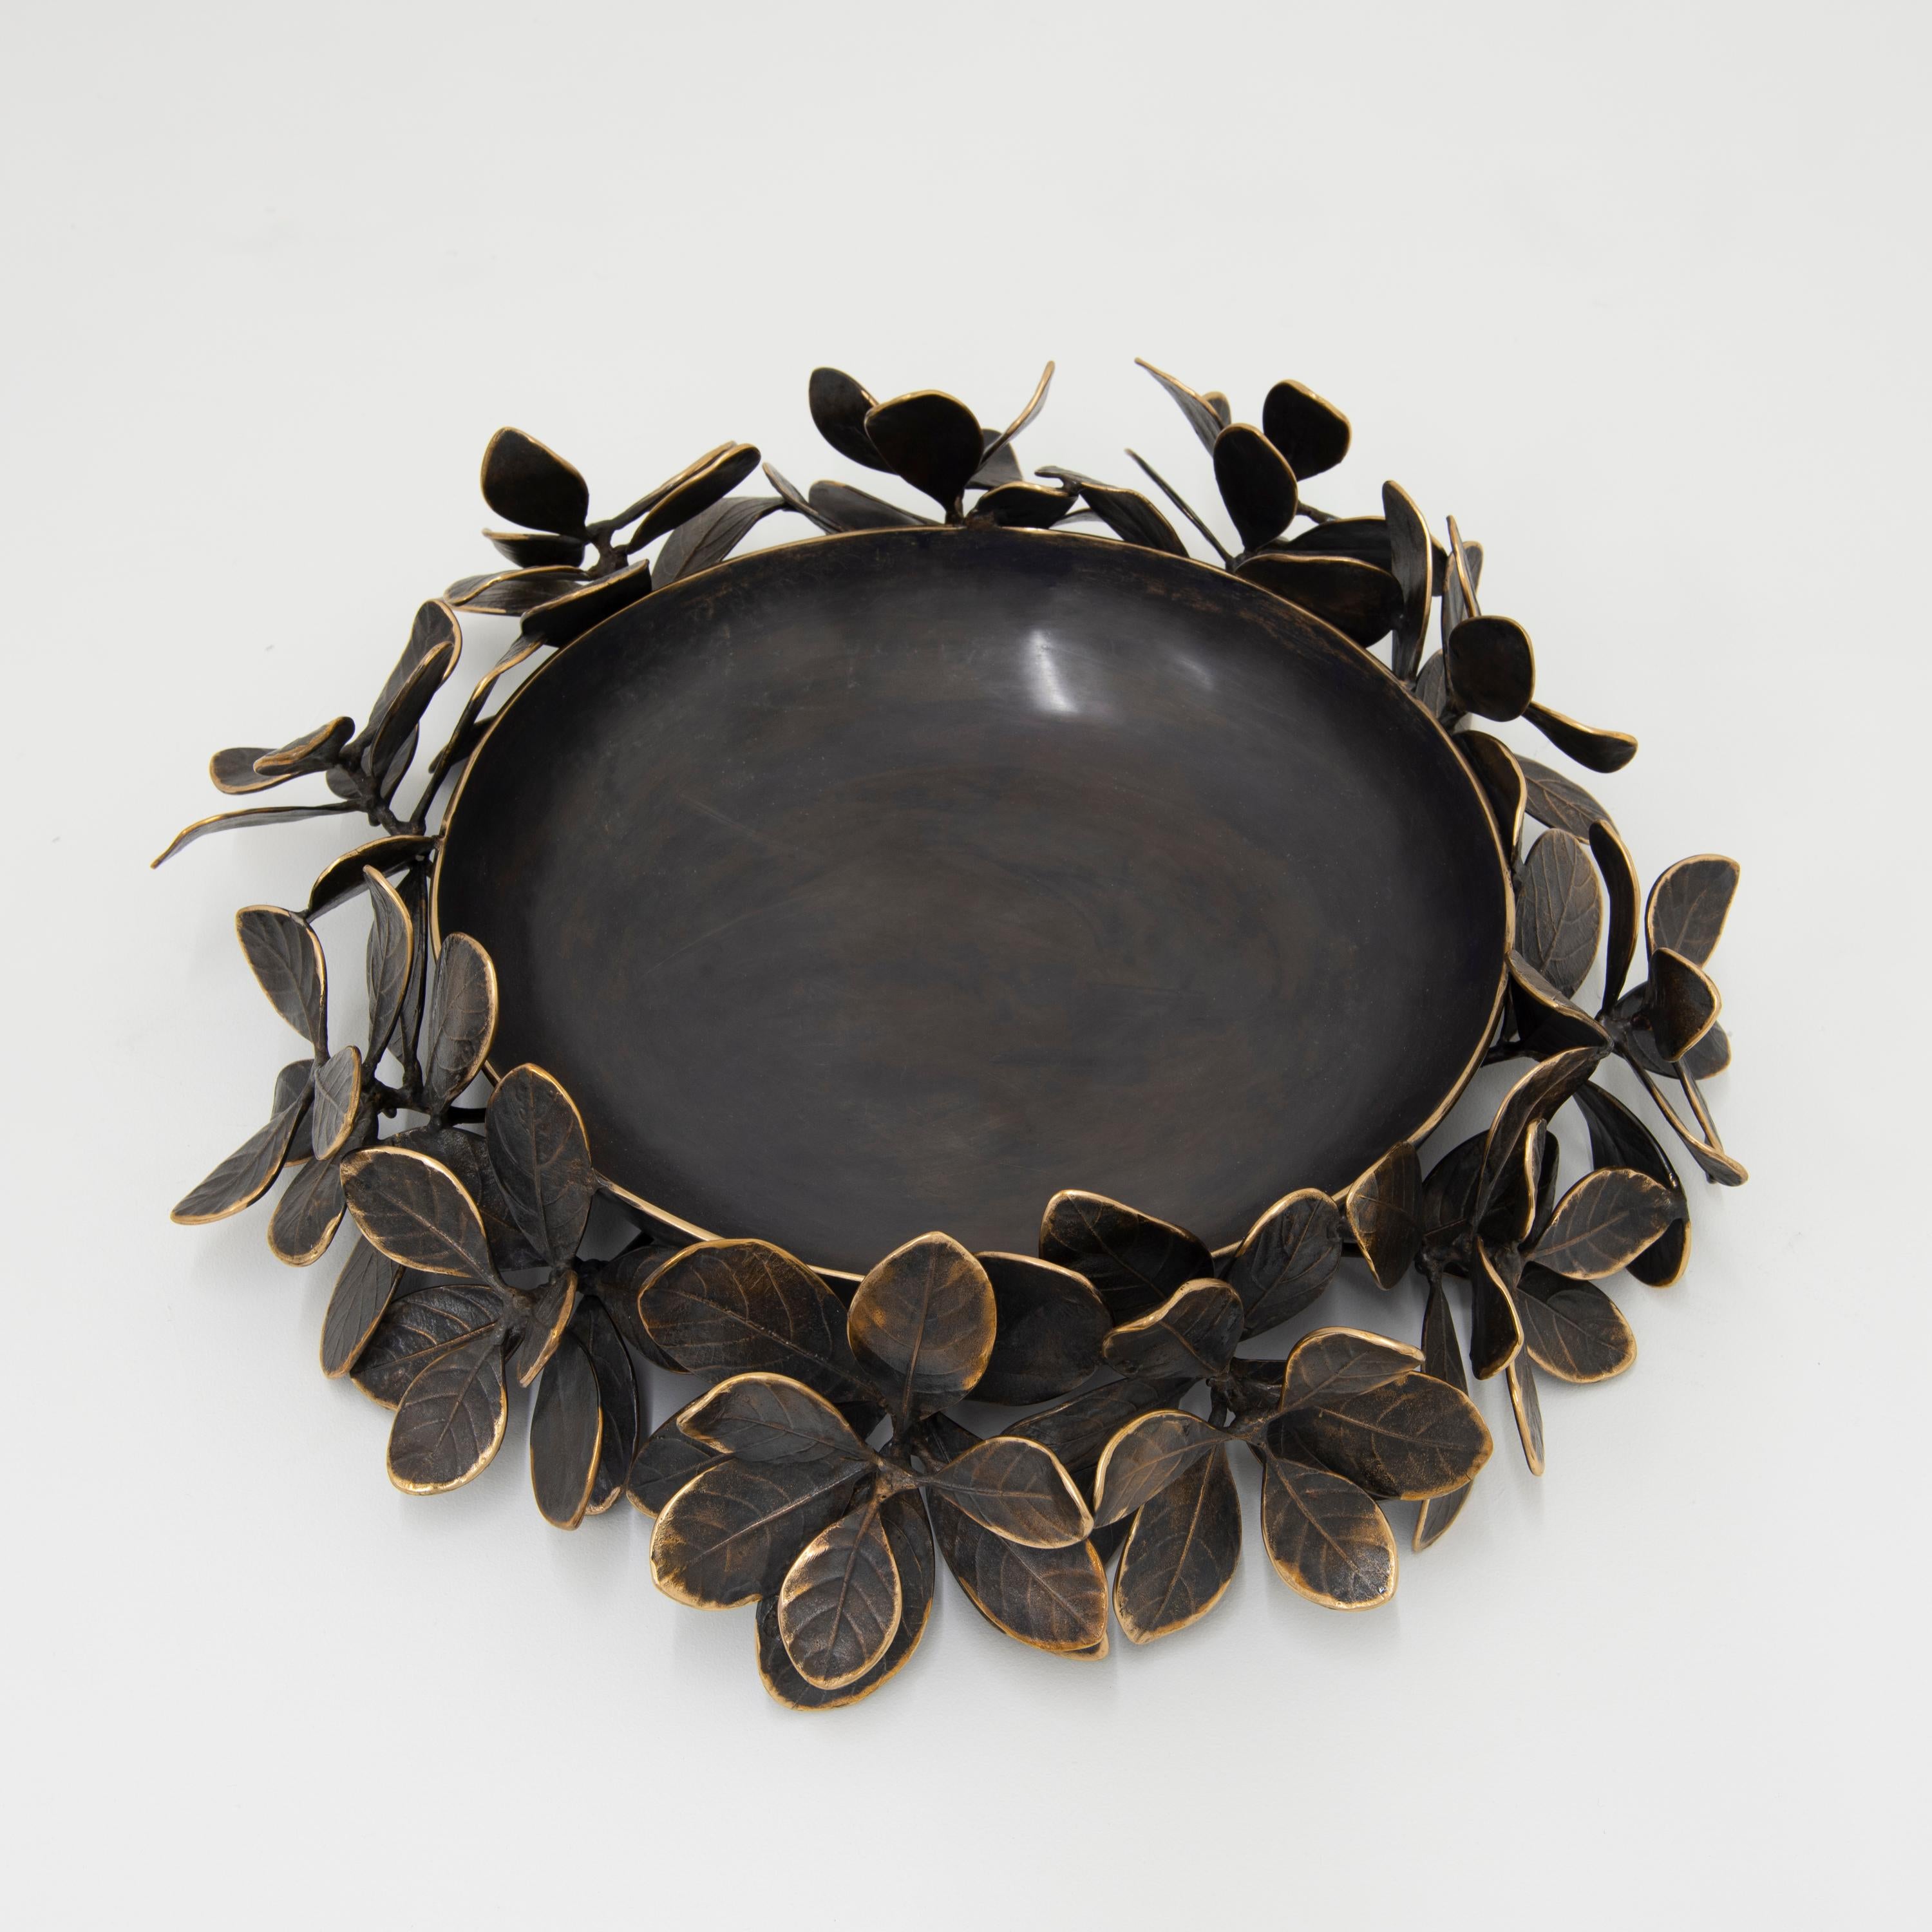 Unique and exquisite bronze cast leaf bowl. Handmade using highly skilled and specialised traditional processes to create an original and sumptuous piece.

Slight variations in the patina and polished finishes, patterns and sizes are characteristics